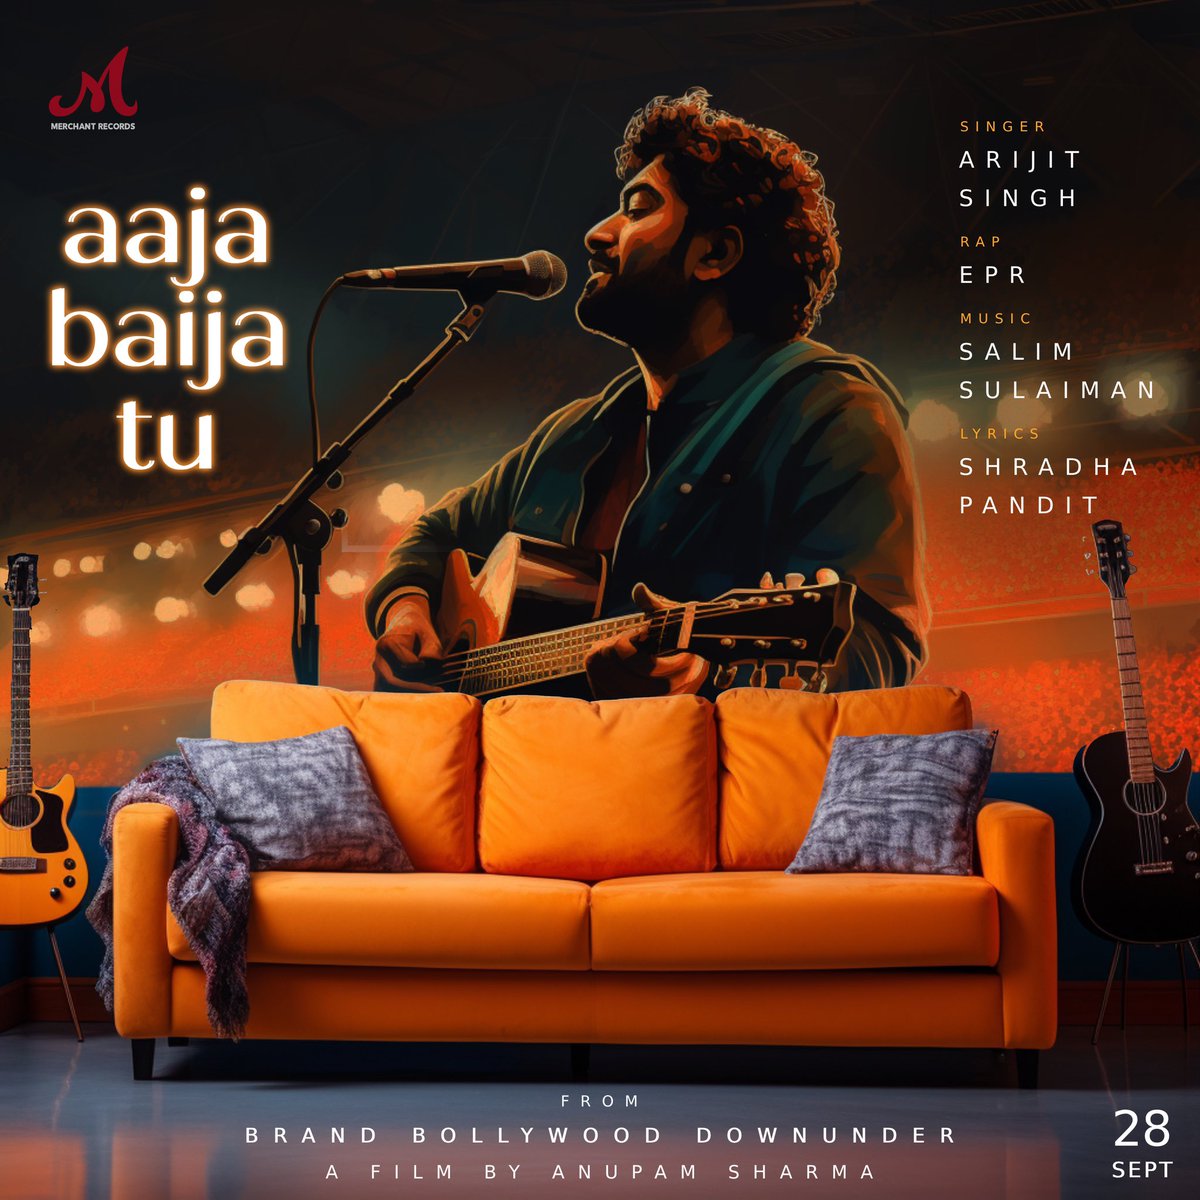 🎶 Mark your calendars! #AajaBaijaTu by @arijitsingh & @IyerEpr is set to drop on Sept 28th. 🌟 Get ready for a musical masterpiece from @salimsulaiman and @AnupamCinema. Don't miss out!🎬 #BollywoodDownUnder 

#merchantrecords #salimsulaiman